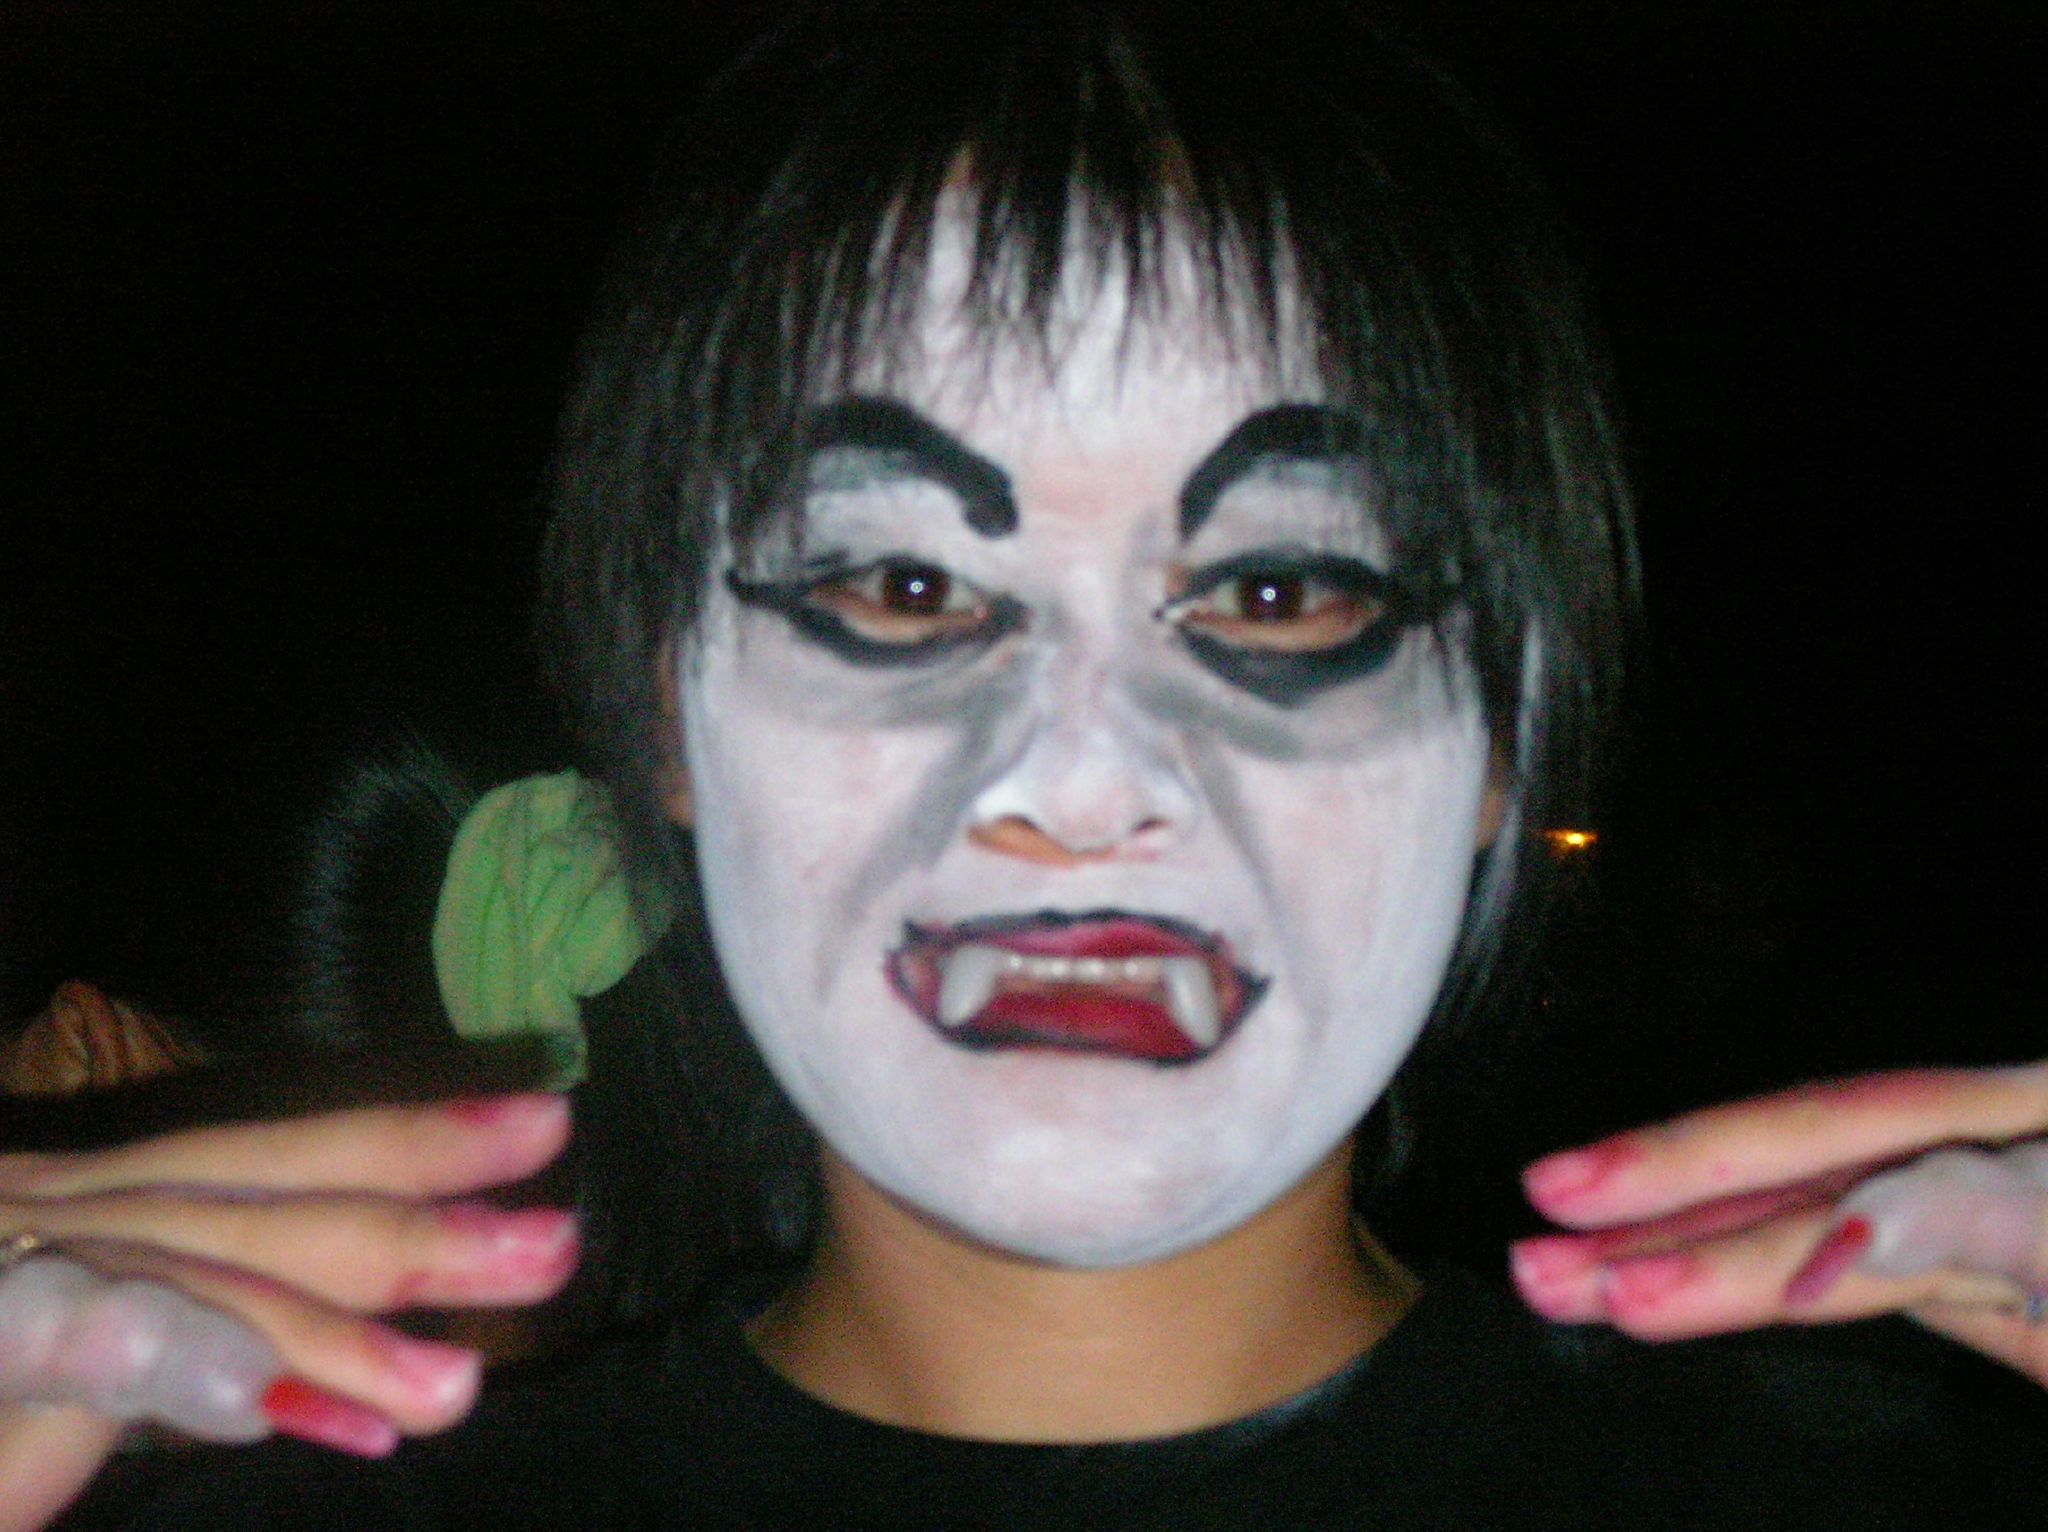 an adult wearing a face paint holding a phone